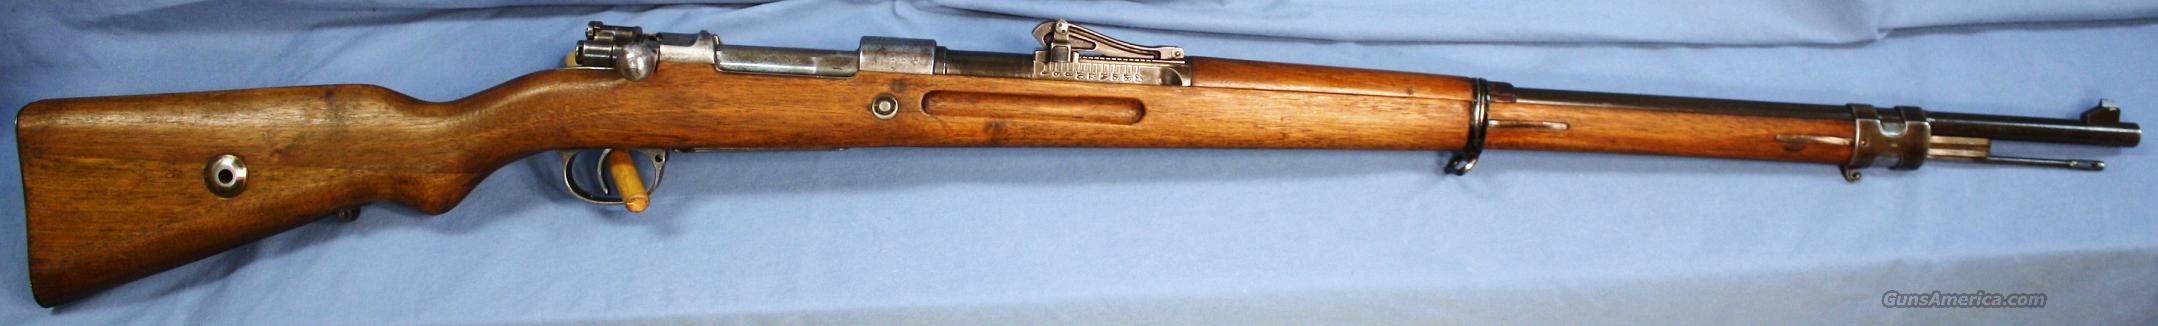 Mauser Gew 98 Wwi German Army Bolt Action Rifle For Sale 0218